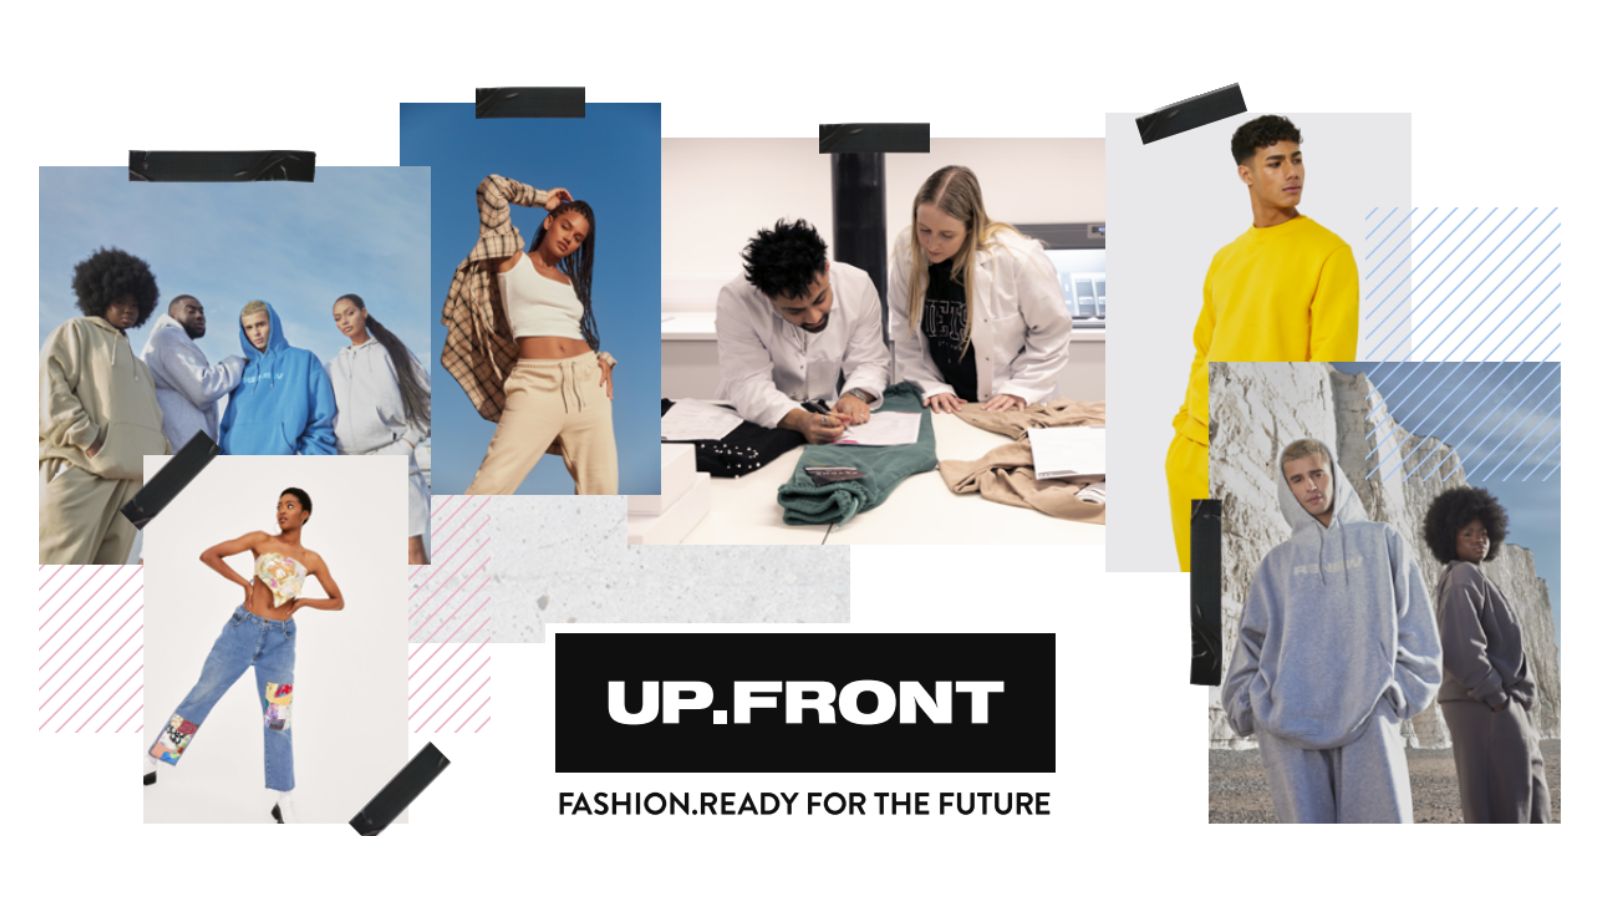 Boohoo's Up.Front, Fashion Ready for the Future strategy.